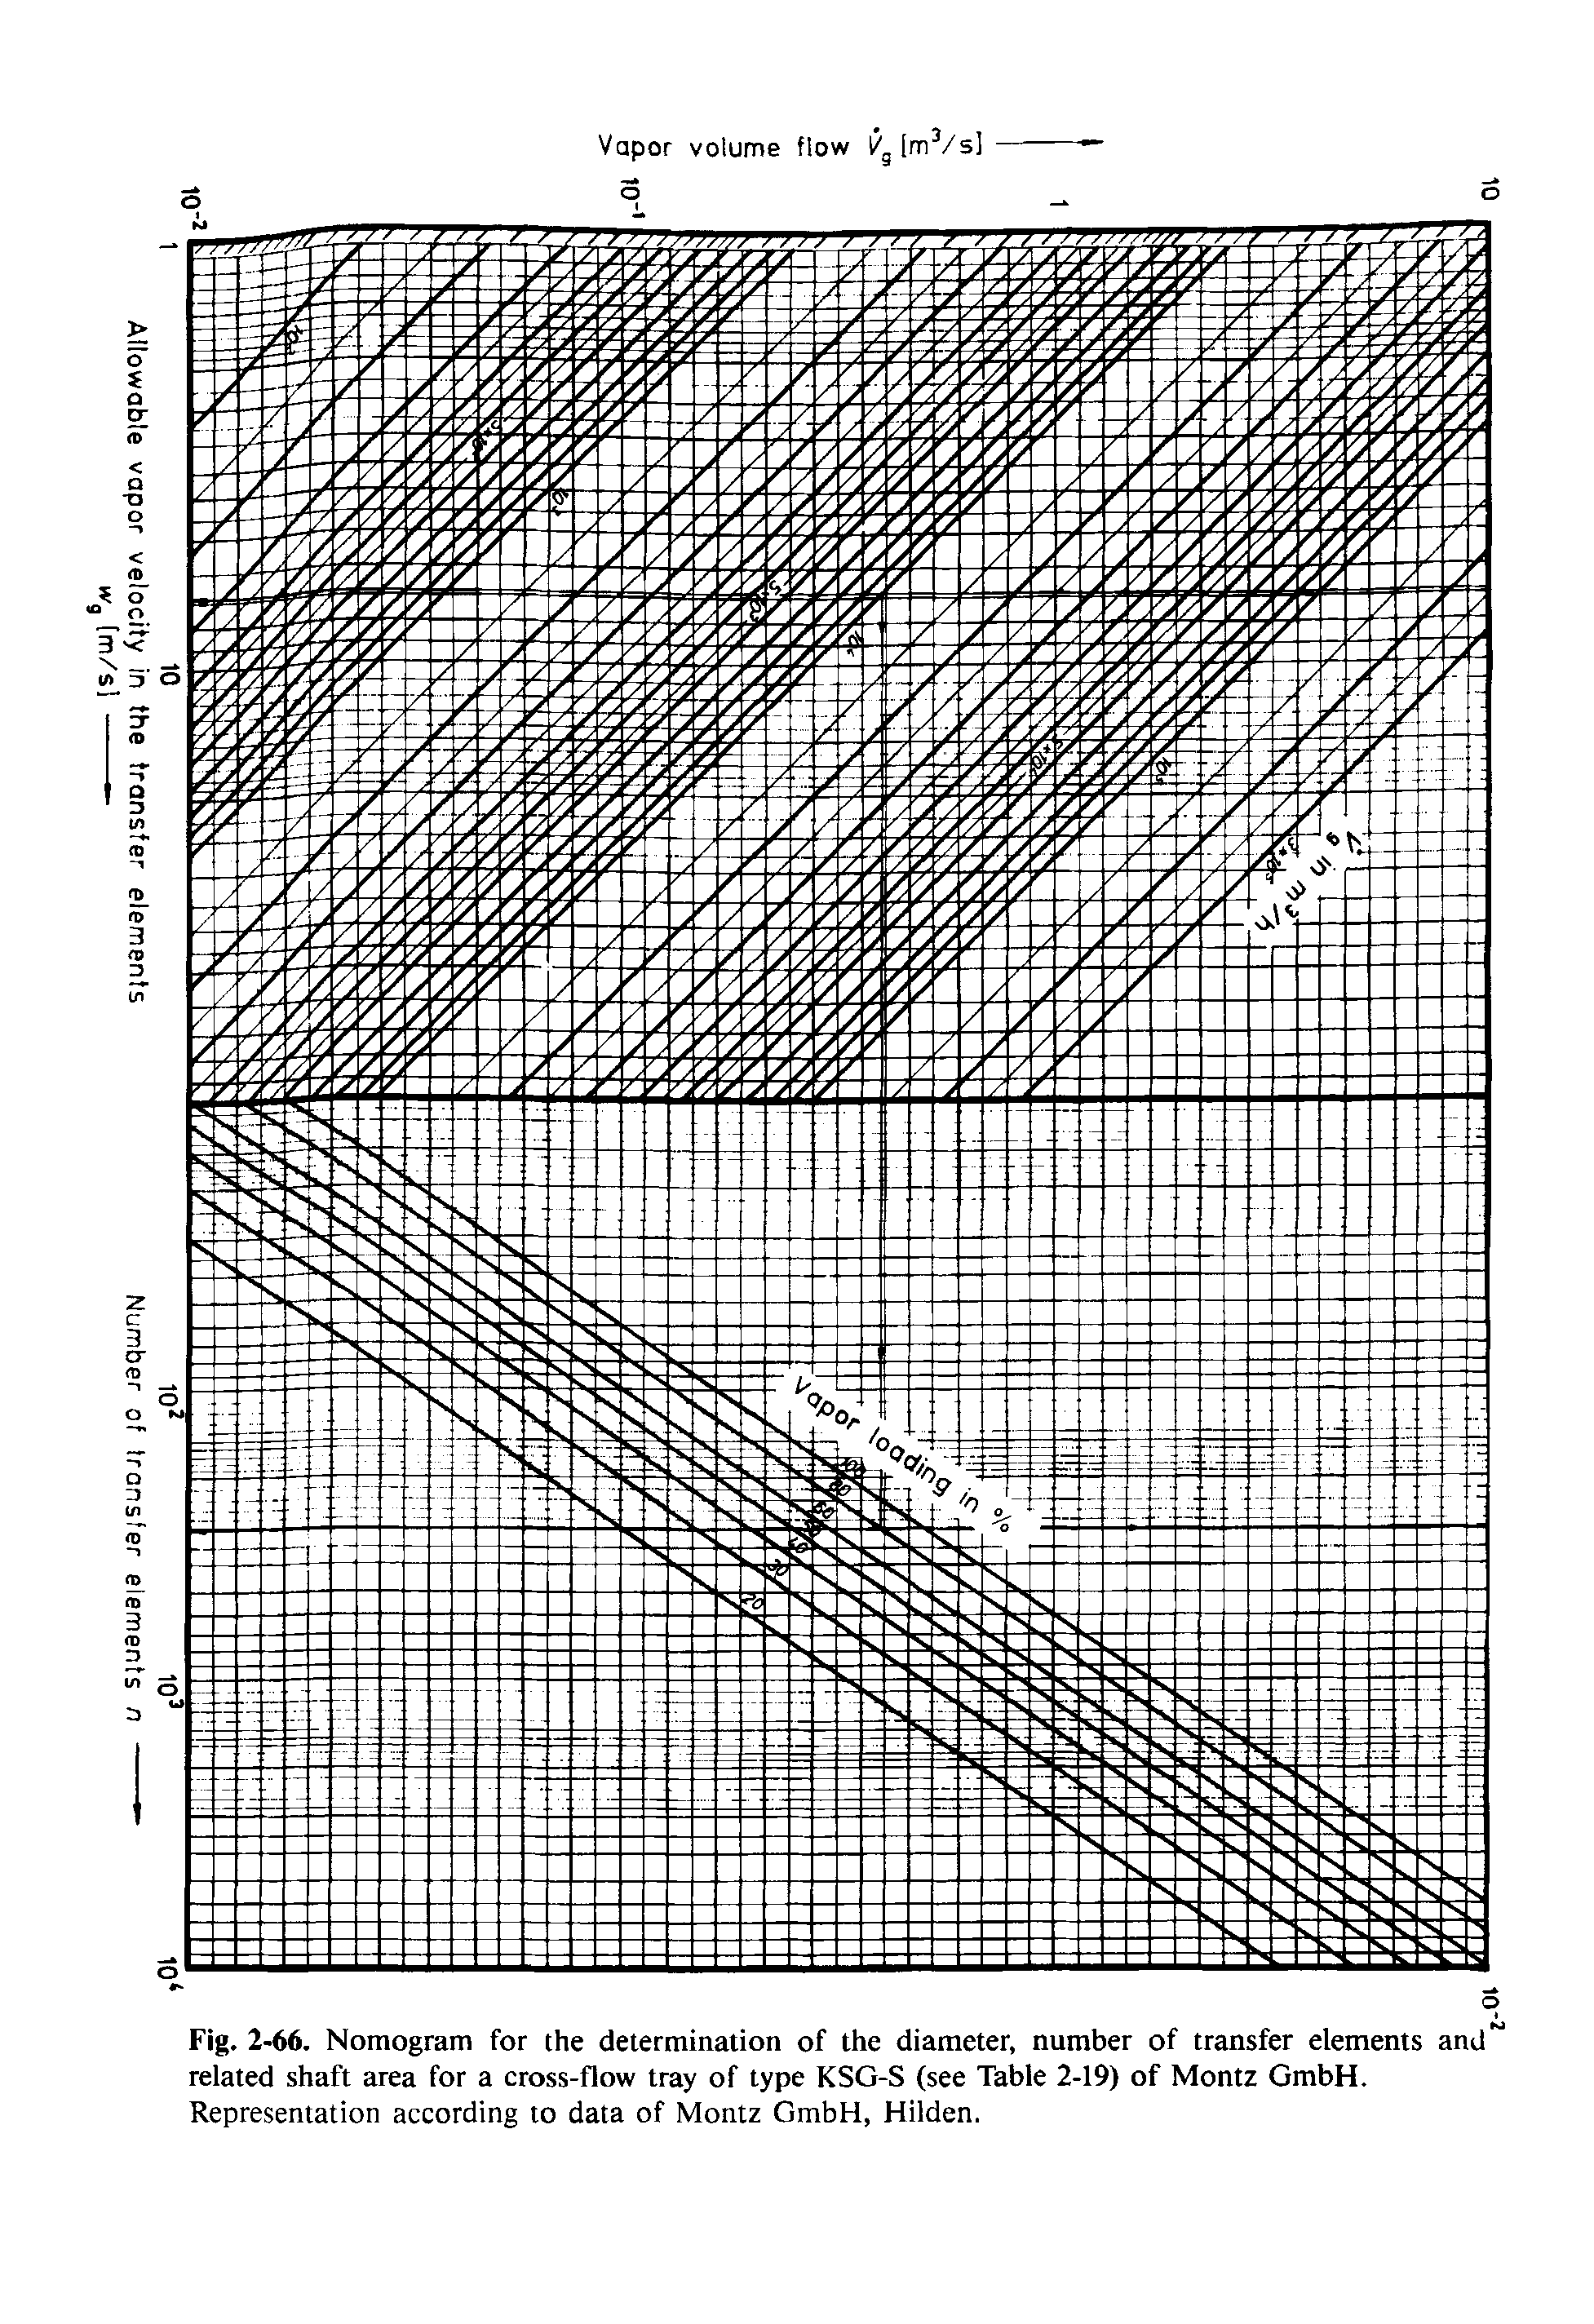 Fig. 2-66. Nomogram for the determination of the diameter, number of transfer elements and related shaft area for a cross-flow tray of type KSG-S (see Table 2-19) of Montz GmbH.